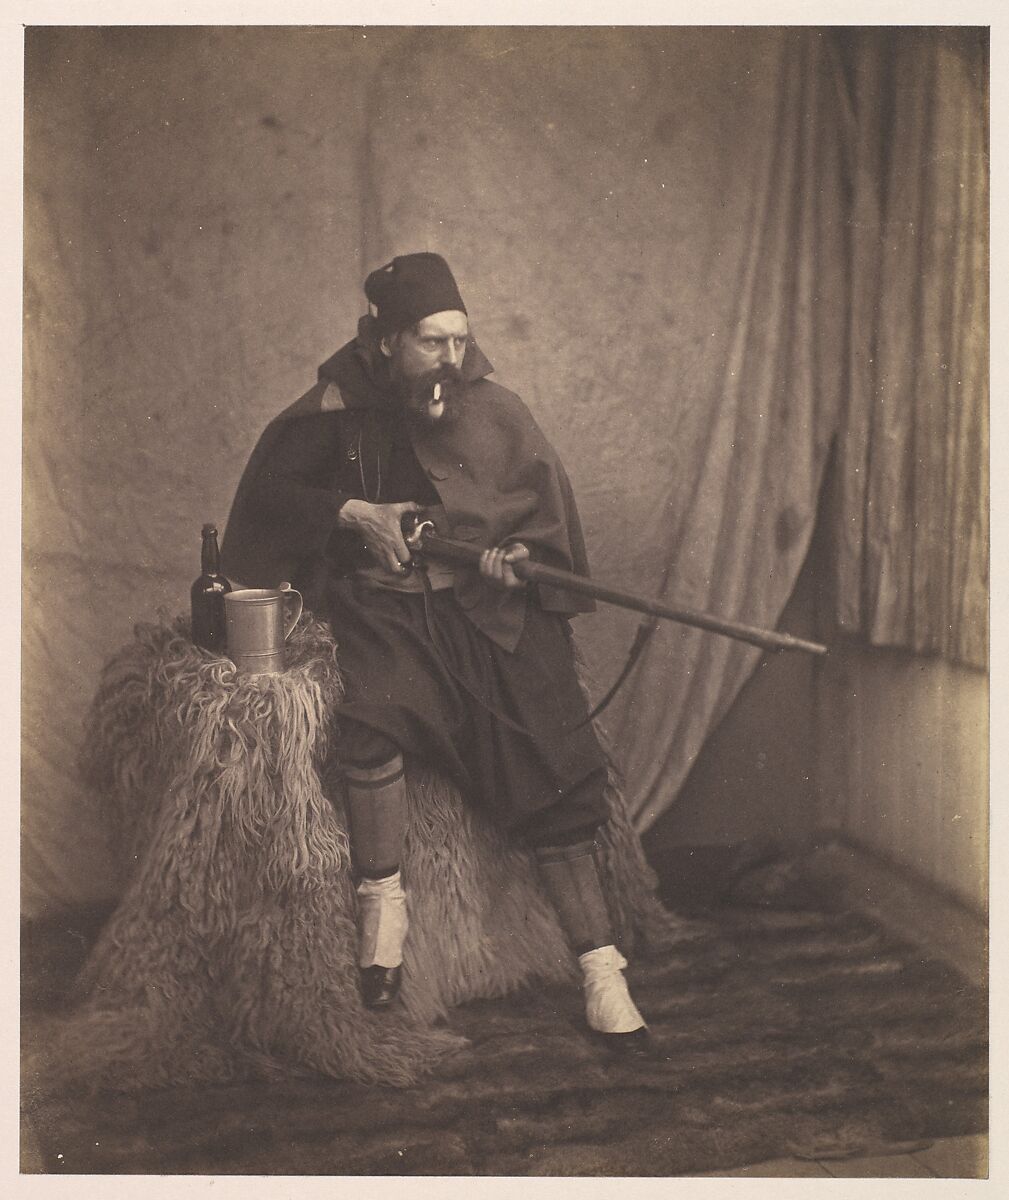 Zouave, 2nd Division, Roger Fenton (British, 1819–1869), Salted paper print from collodion glass negative 